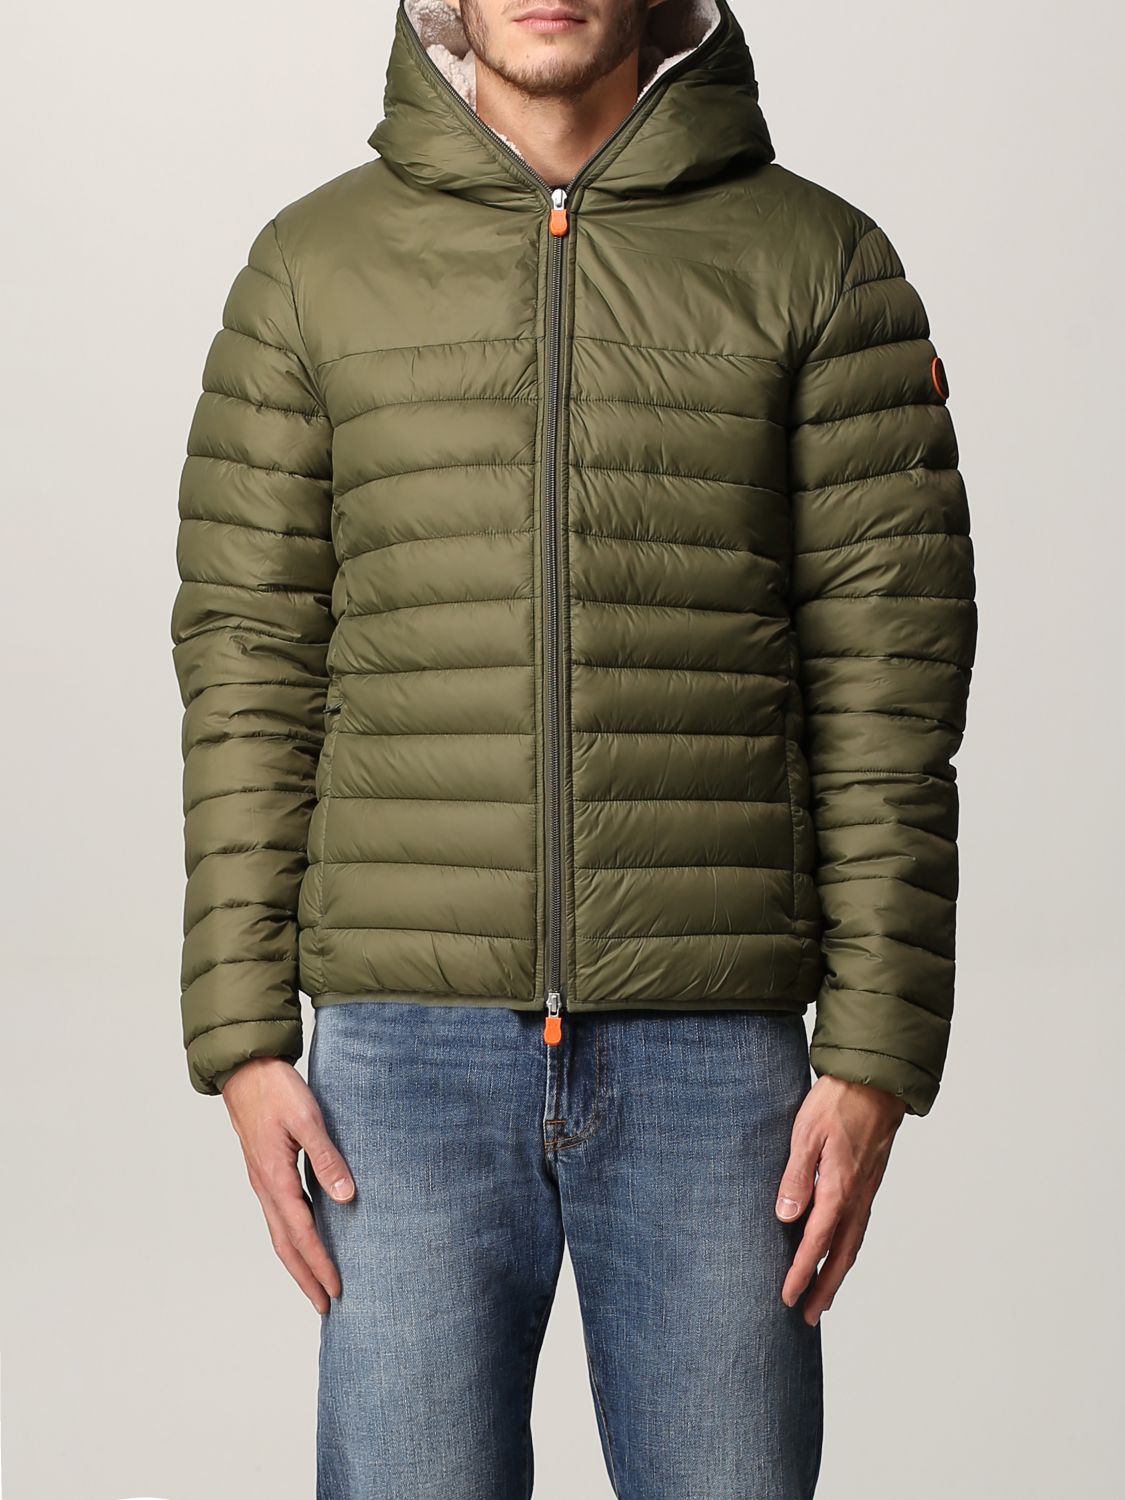 Jacket Save The Duck: Save The Duck jacket for man green 1